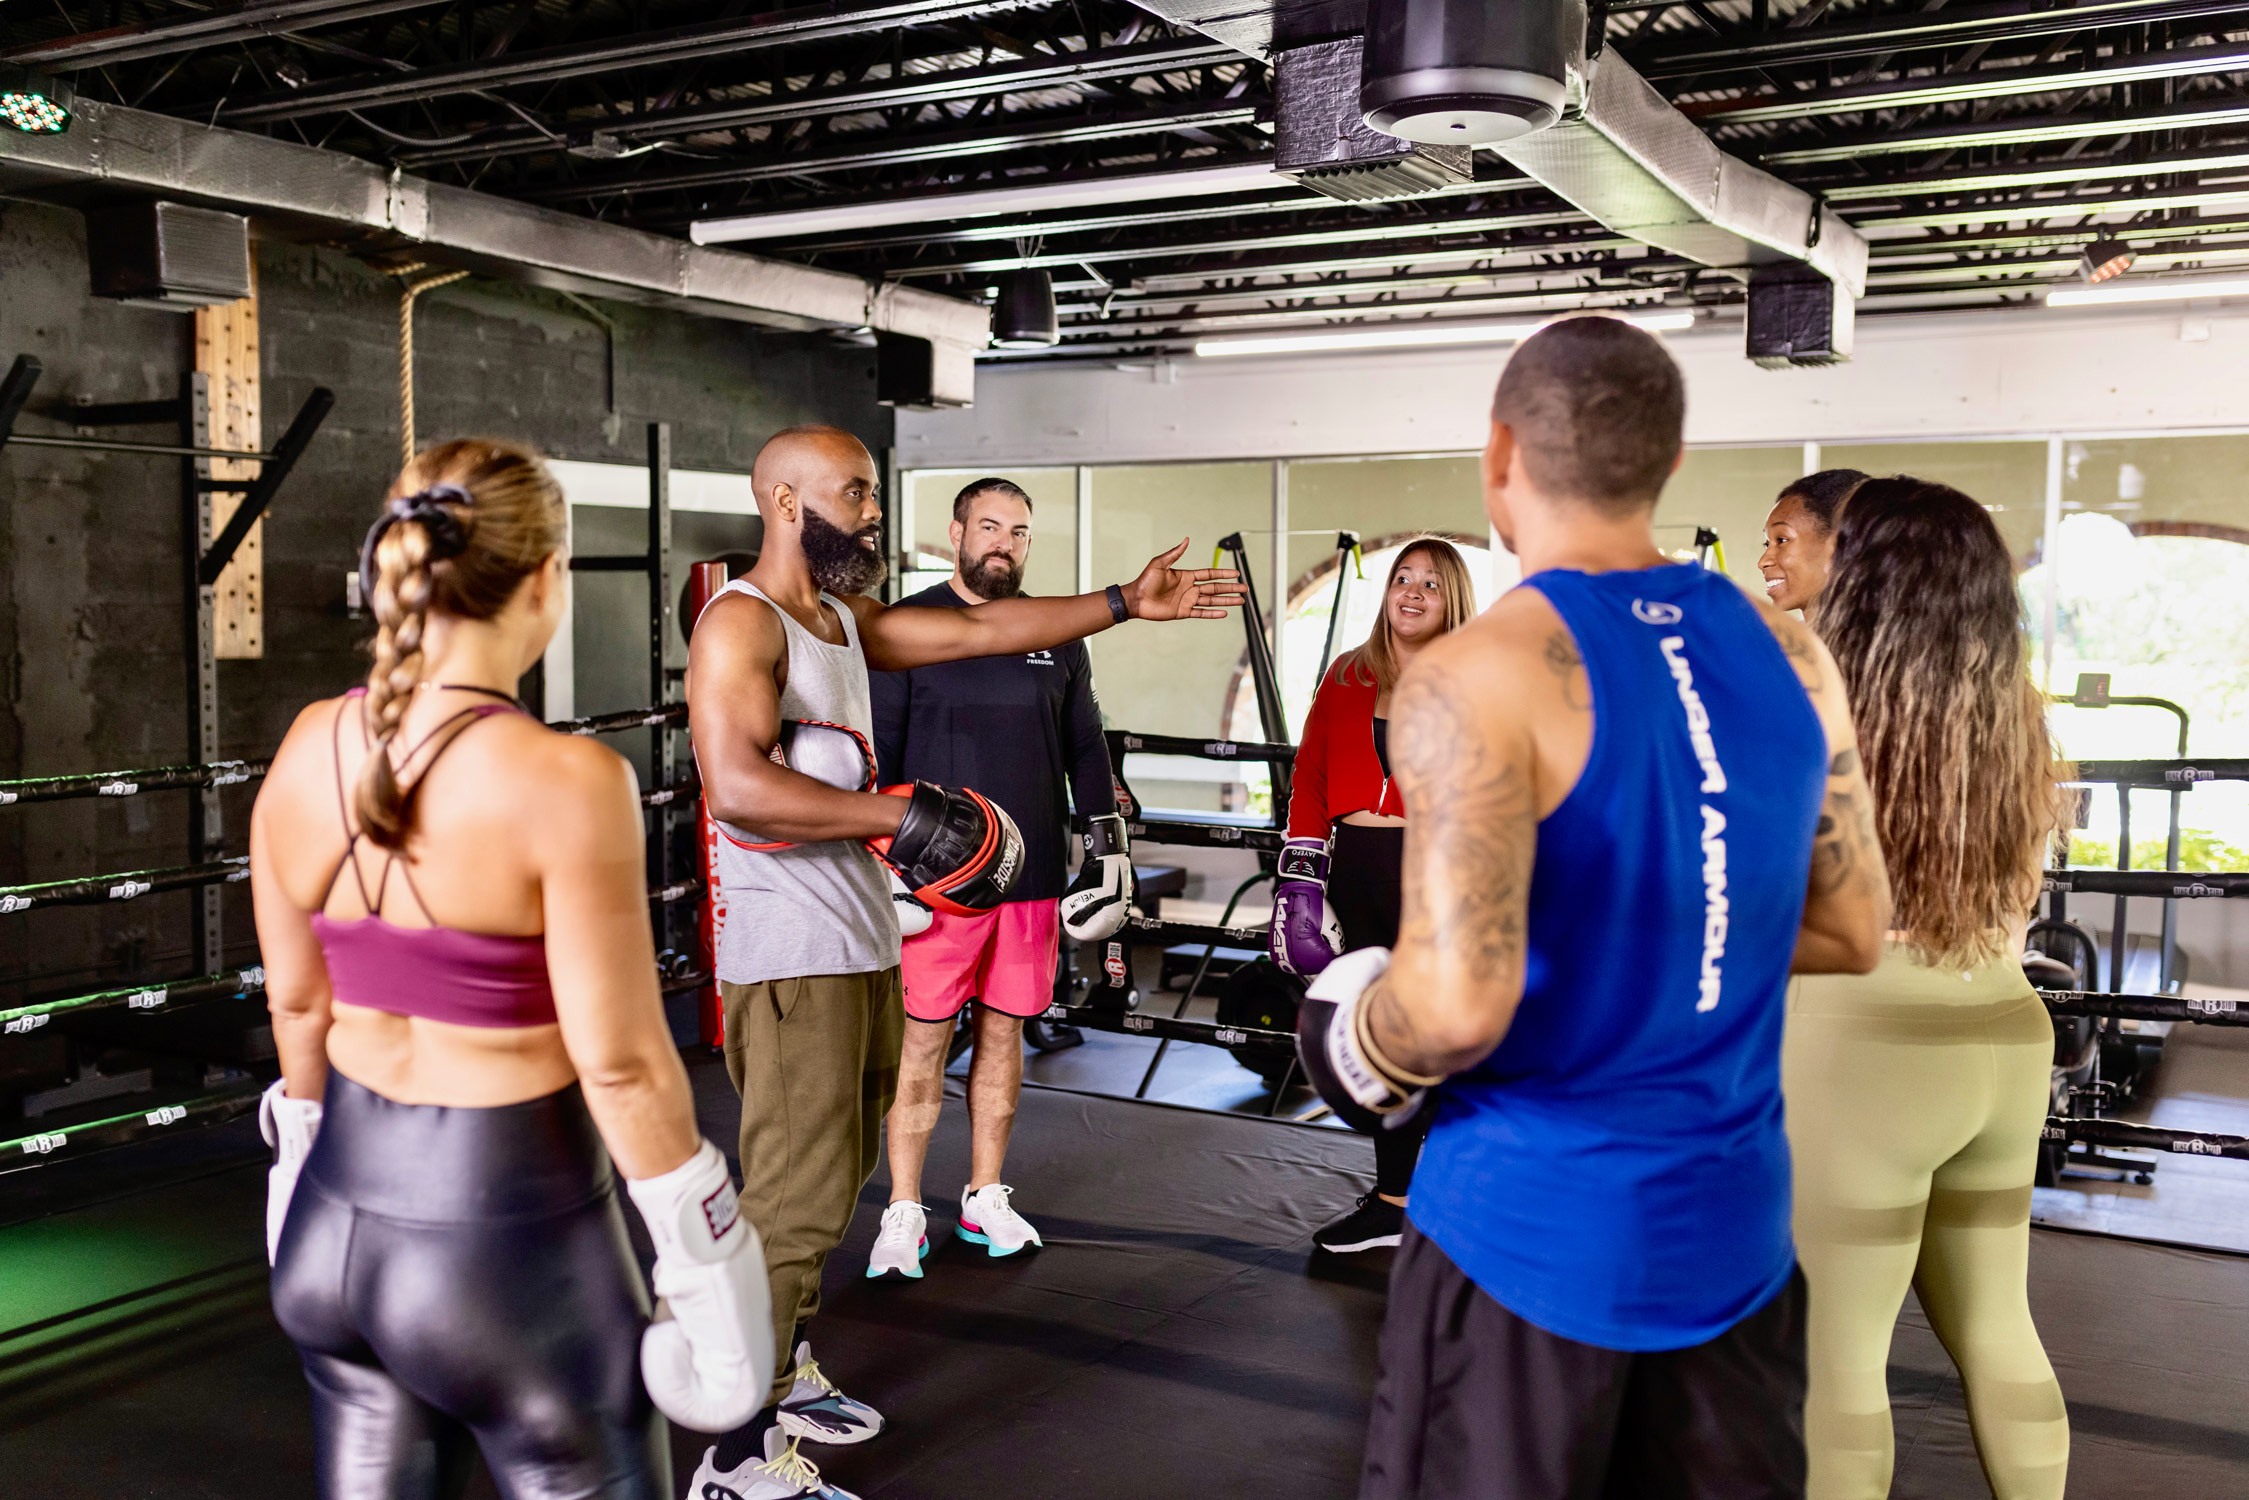 Boxing instructor and gym members in a boxing ring at a gym in Palmetto Bay, Miami, Florida